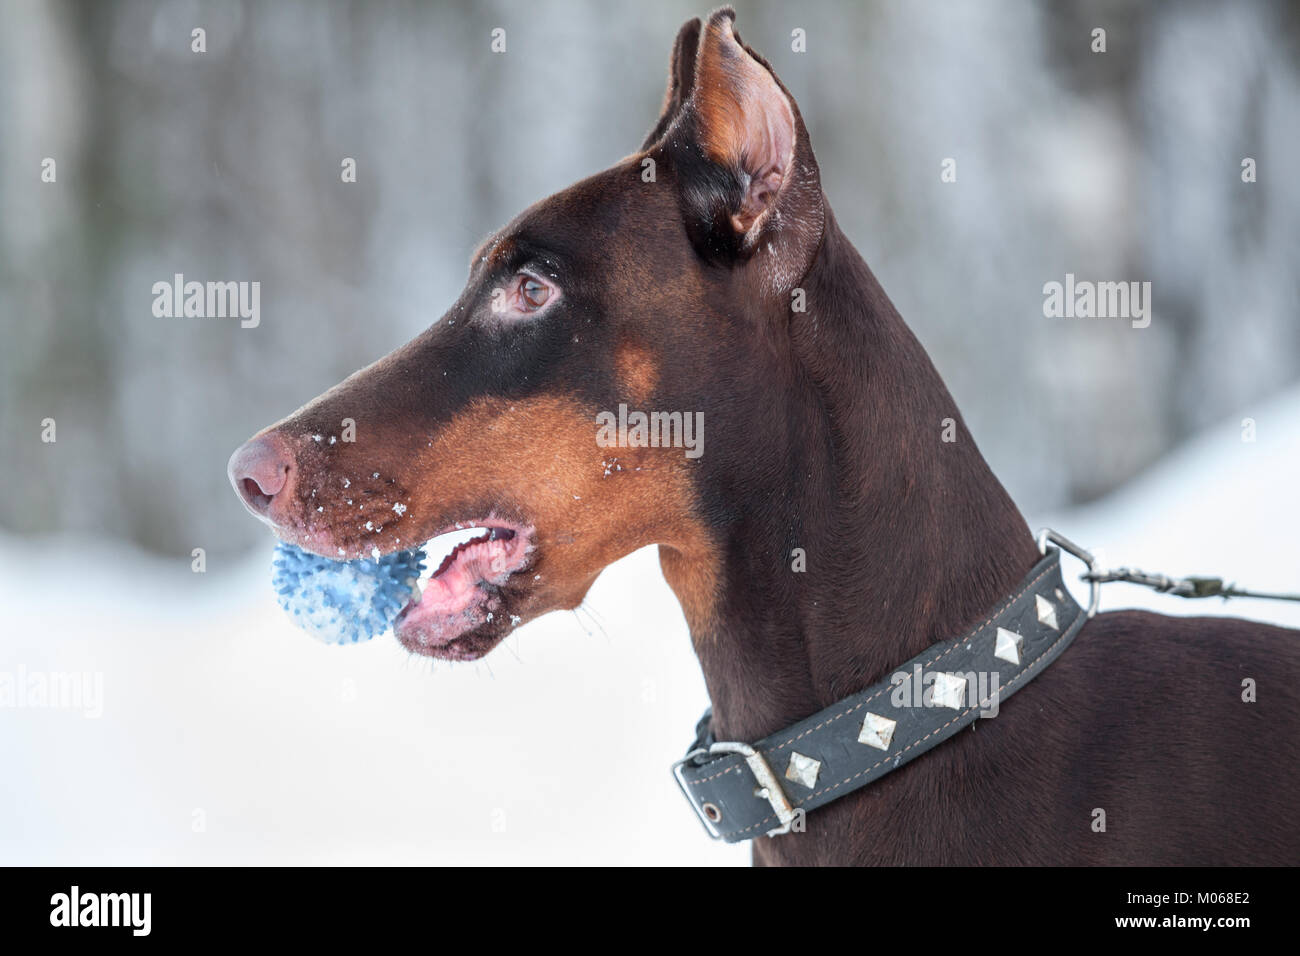 Side view of brown doberman dog with rubber ball in teeth Stock Photo